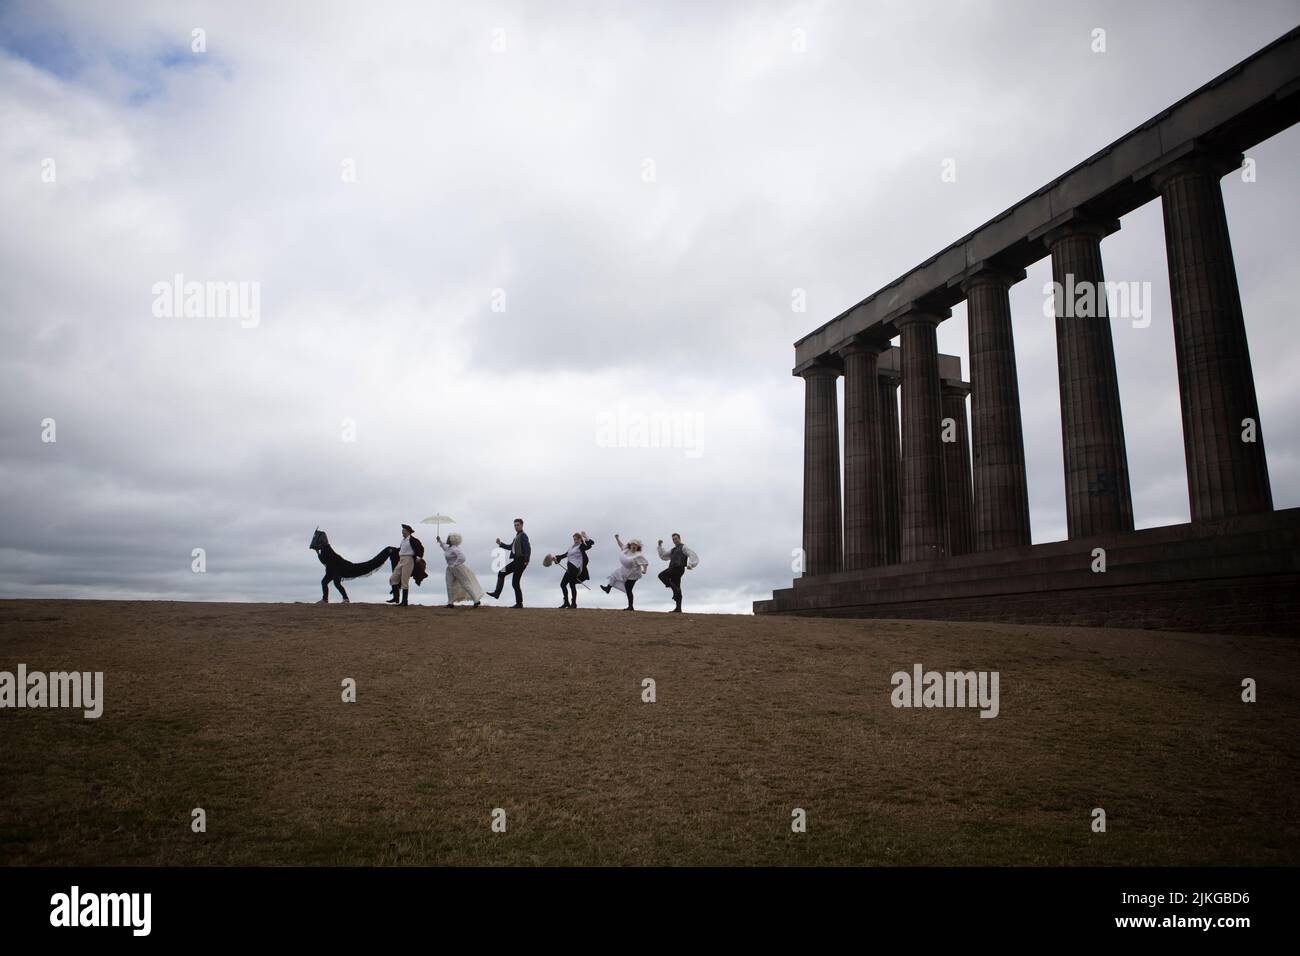 Edinburgh. Scotland. UK. 2nd August 2022. Photocall: Literary closing and slapstick on Calton Hill. The Fringe the six actors from the brilliantly fast paced slapstick romp Classic! (daily 3- 29 August Pleasance 1) will wear a smorgasbord of 17th, 18th, and 19th century costumes (think wigs, parasols, long velvet, military jackets and jolly jack tars). With props including trumpets, parasols, a pantomime horse, very unperiod water pistols and a bright pink melodica). They will be clowning and posing with the city behind them and on The National Monument of Scotland. Pic: Pako Mera/Alamy Li Stock Photo